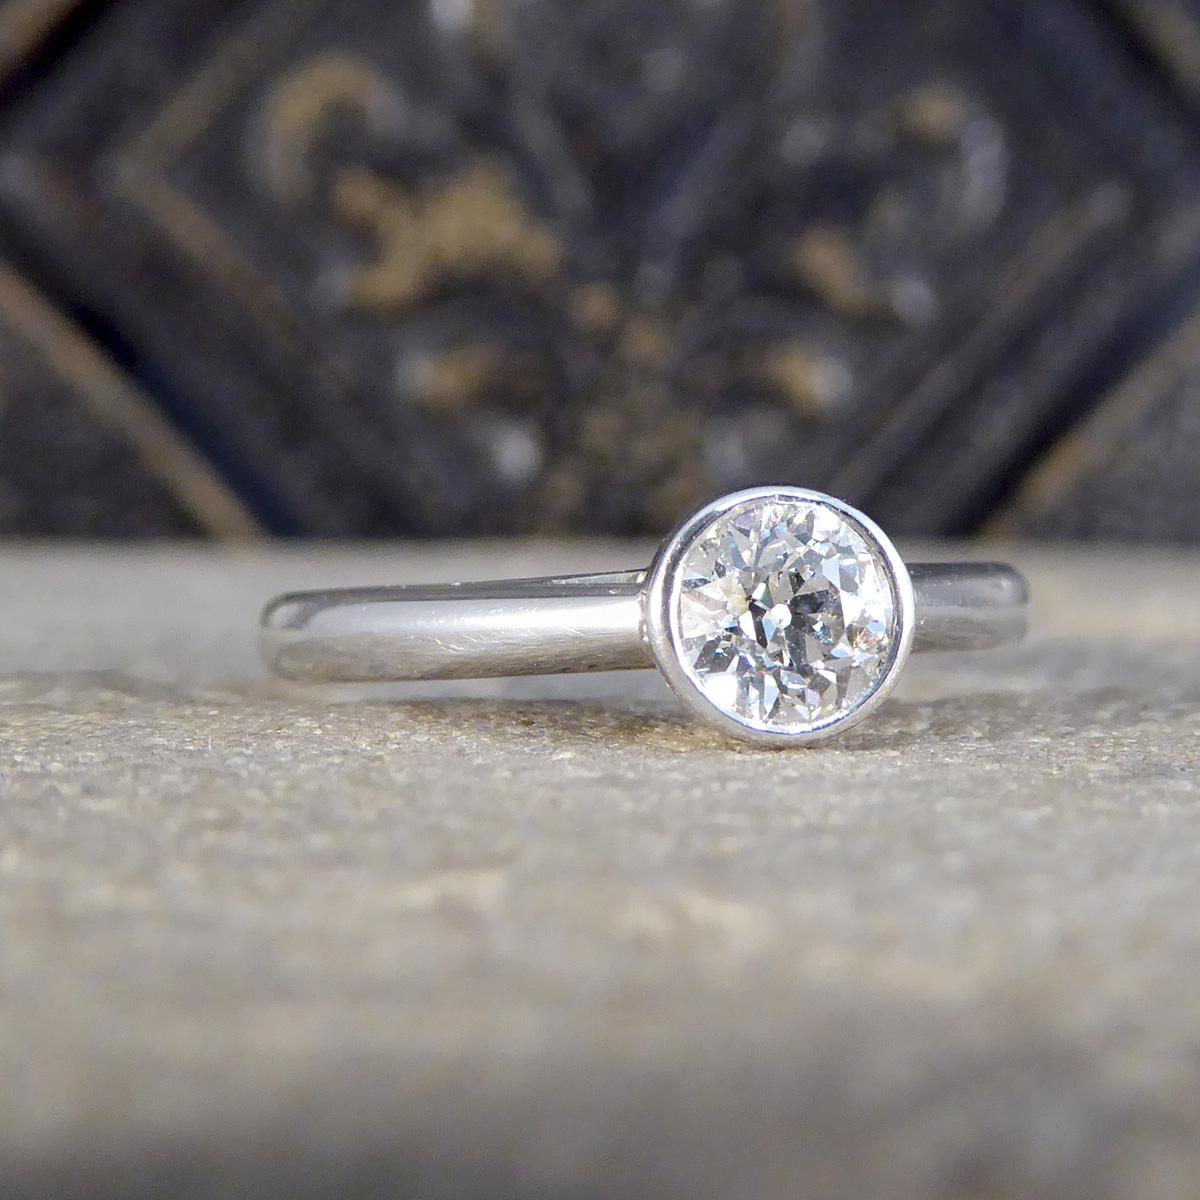 This gorgeous Diamond solitaire ring in 18ct White Gold is the epitome of elegance and simplicity, designed for those who appreciate refined beauty. The centre piece of this exquisite ring is an old European cut diamond weighing approximately 0.41ct